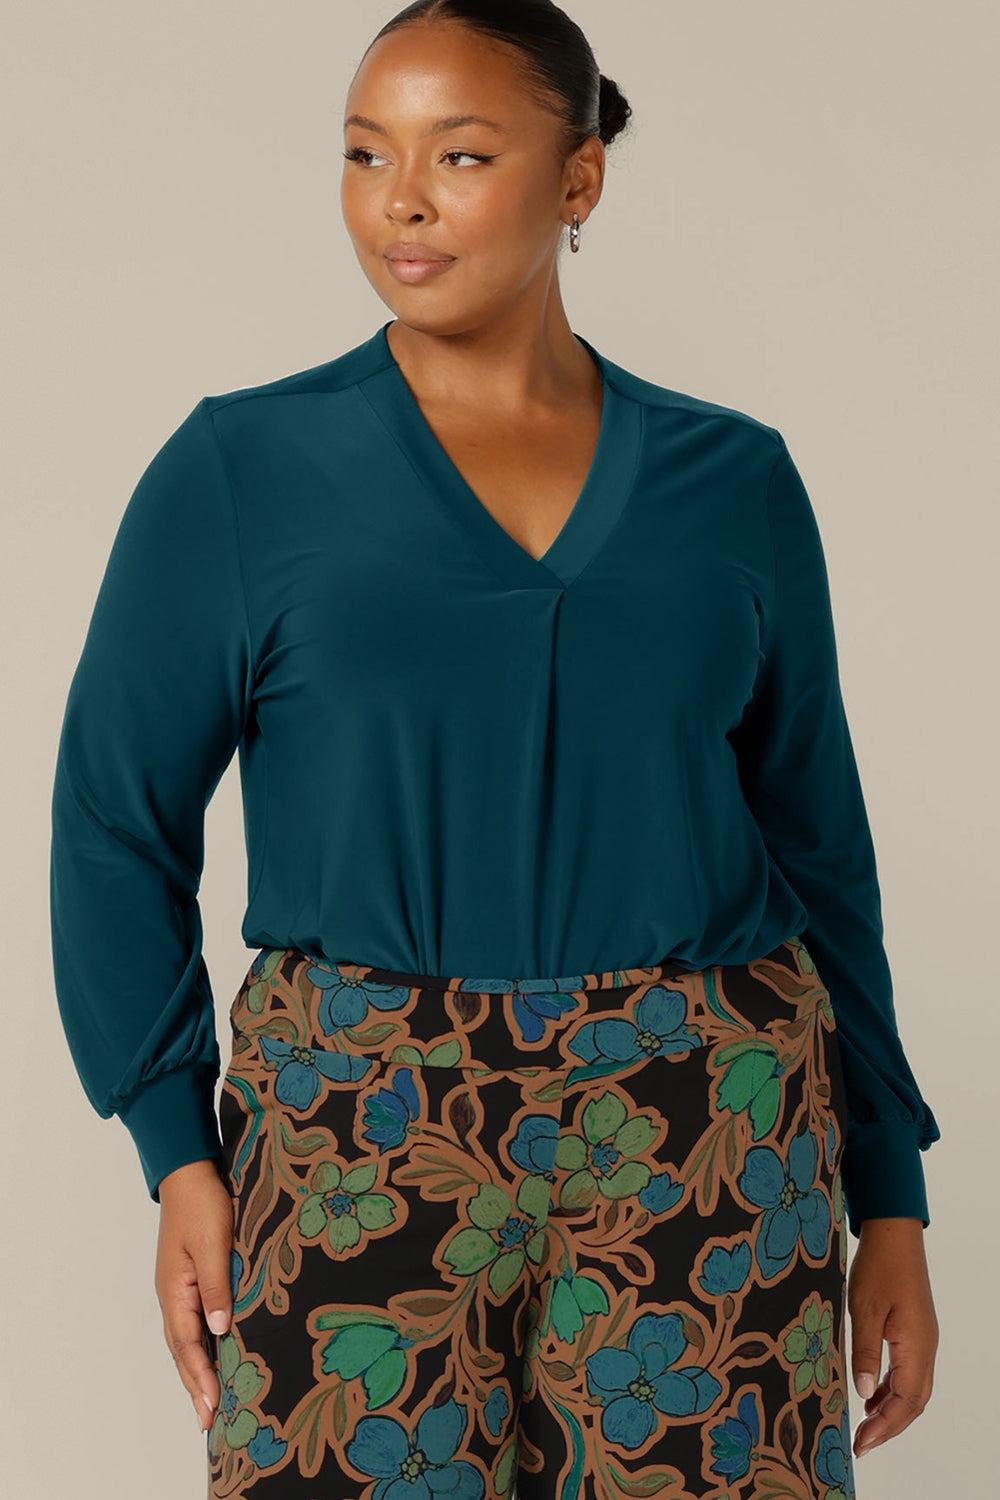 Long sleeve, V-neck top in dark teal jersey, size 12 by Australian and New Zealand women's clothing company, L&F. Available to shop in sizes 8 to 24.